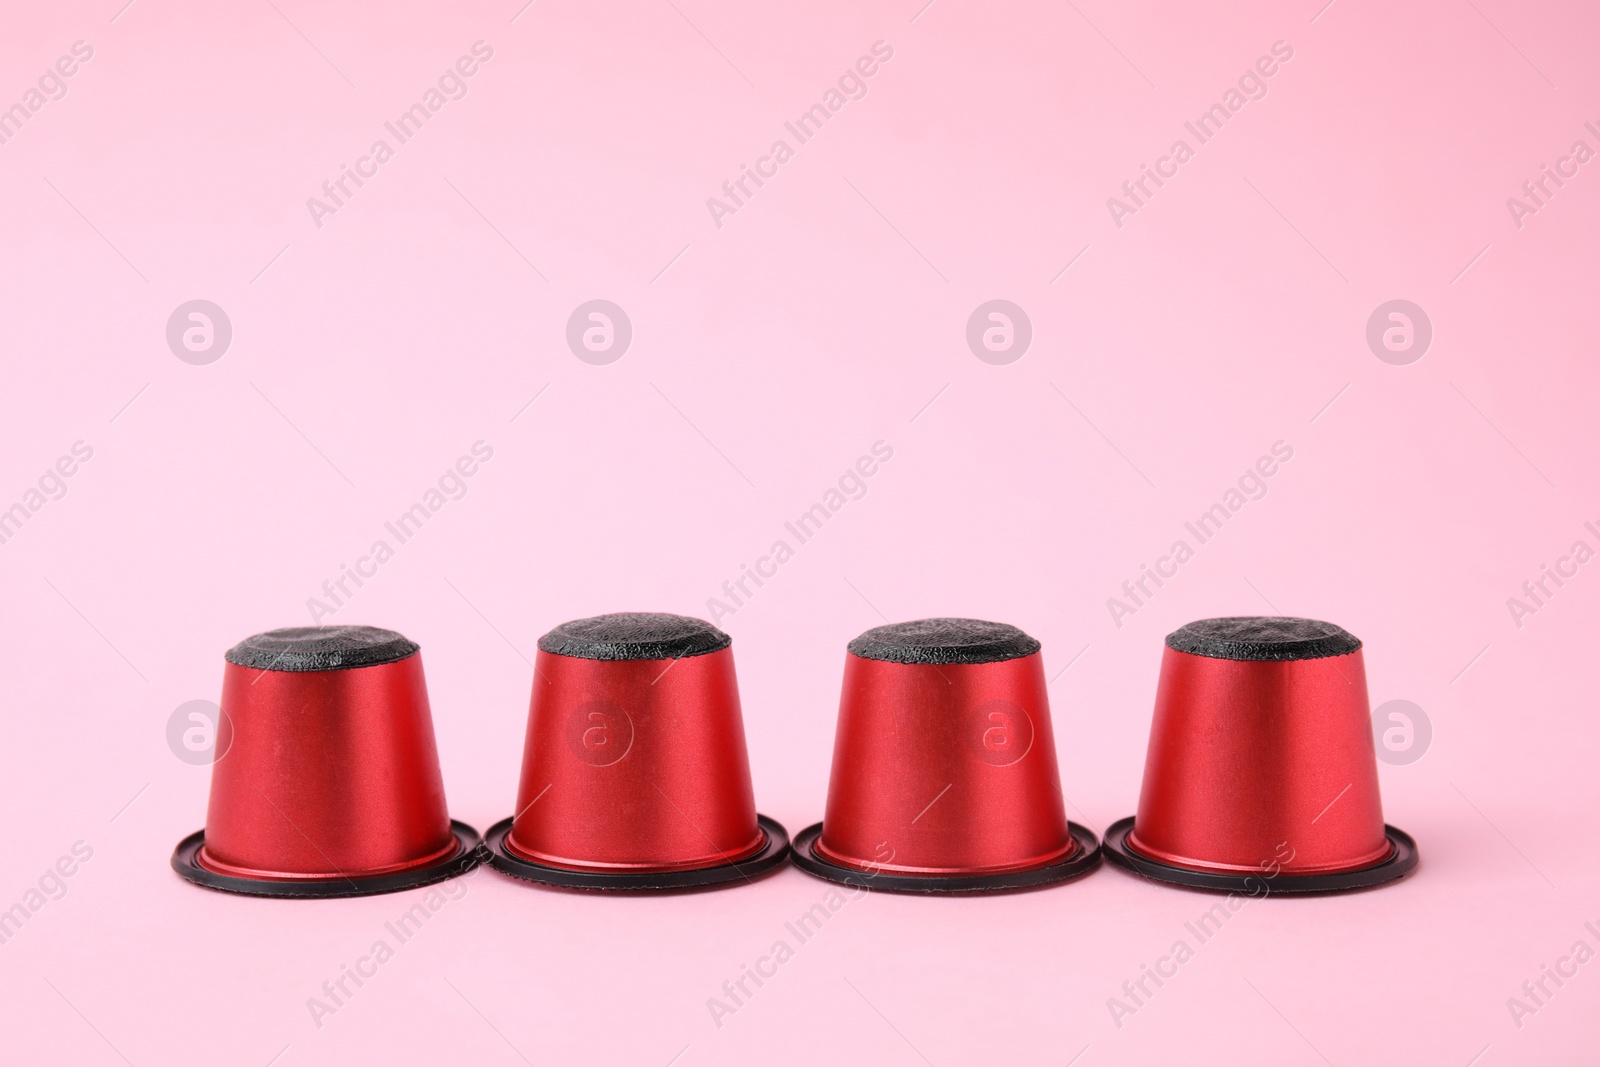 Photo of Many plastic coffee capsules on pink background